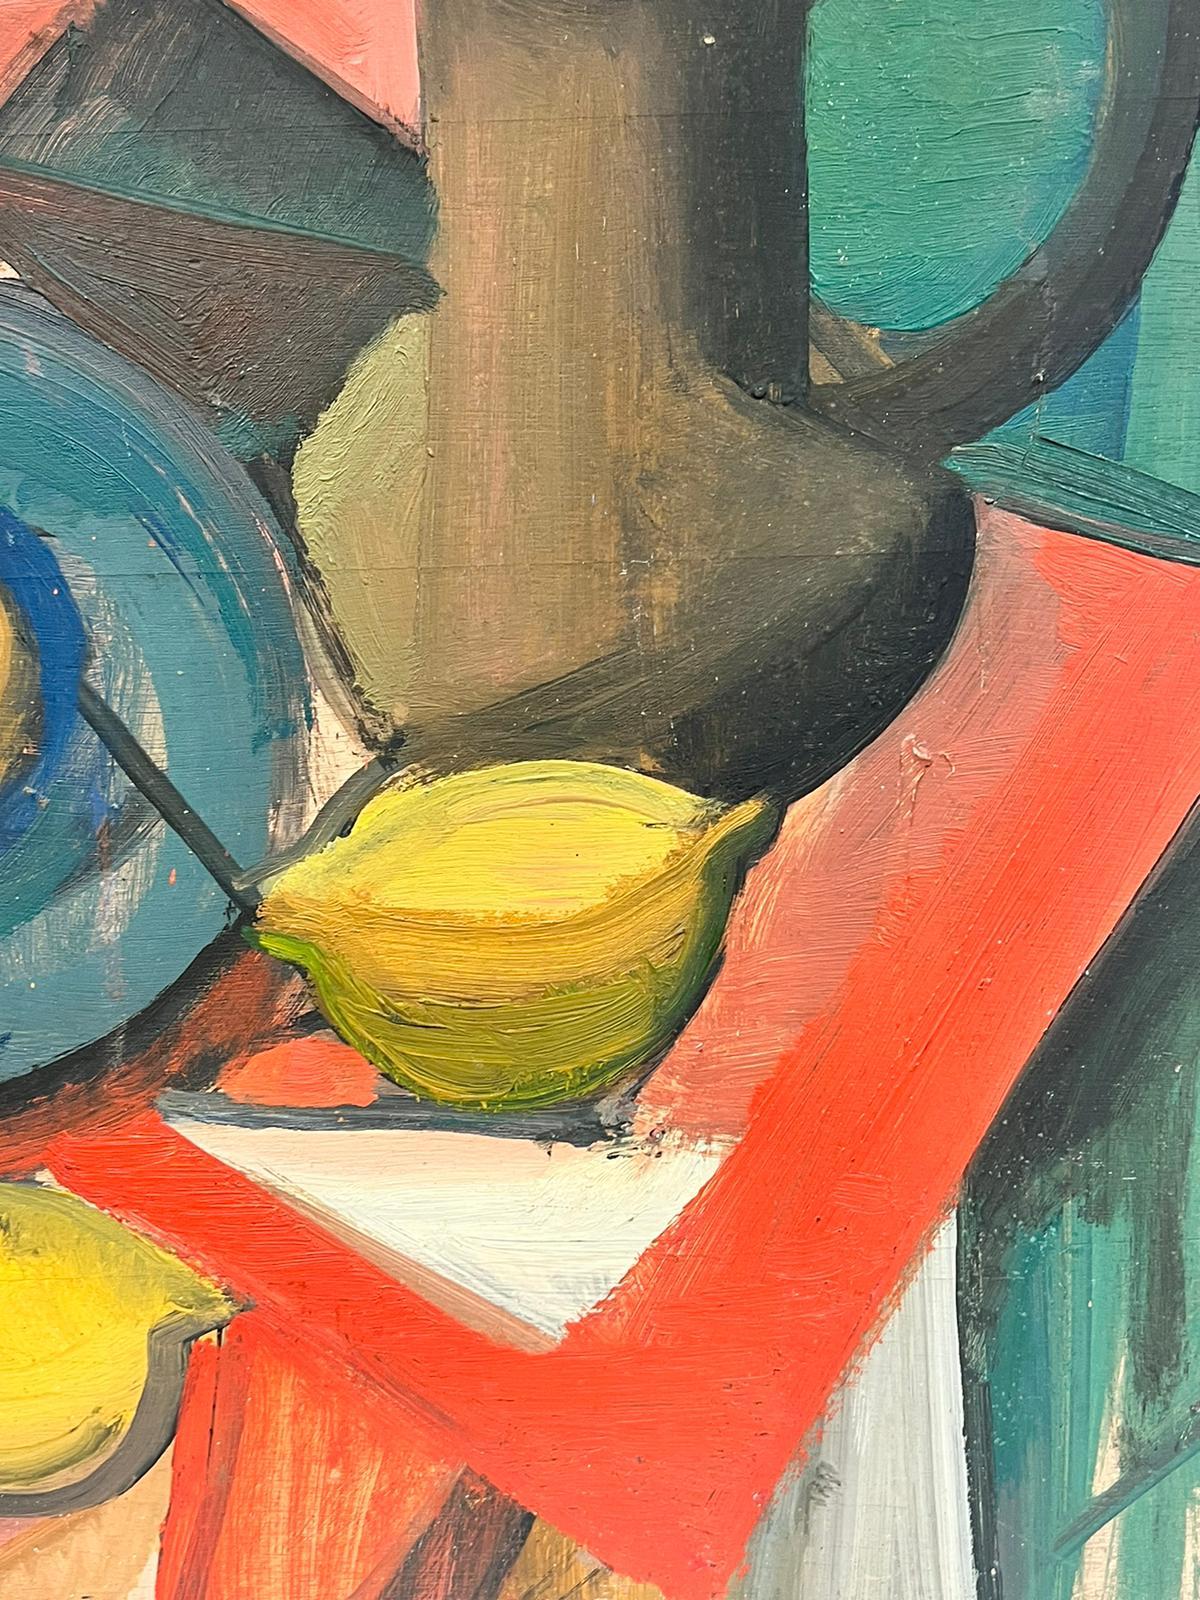 Kitchen Table Still Life
French School, circa 1950's
double sided
oil on board, unframed
board: 20 x 18 inches
the painting is in overall good and sound condition, some minor scuffing to surface
from a private collection in France